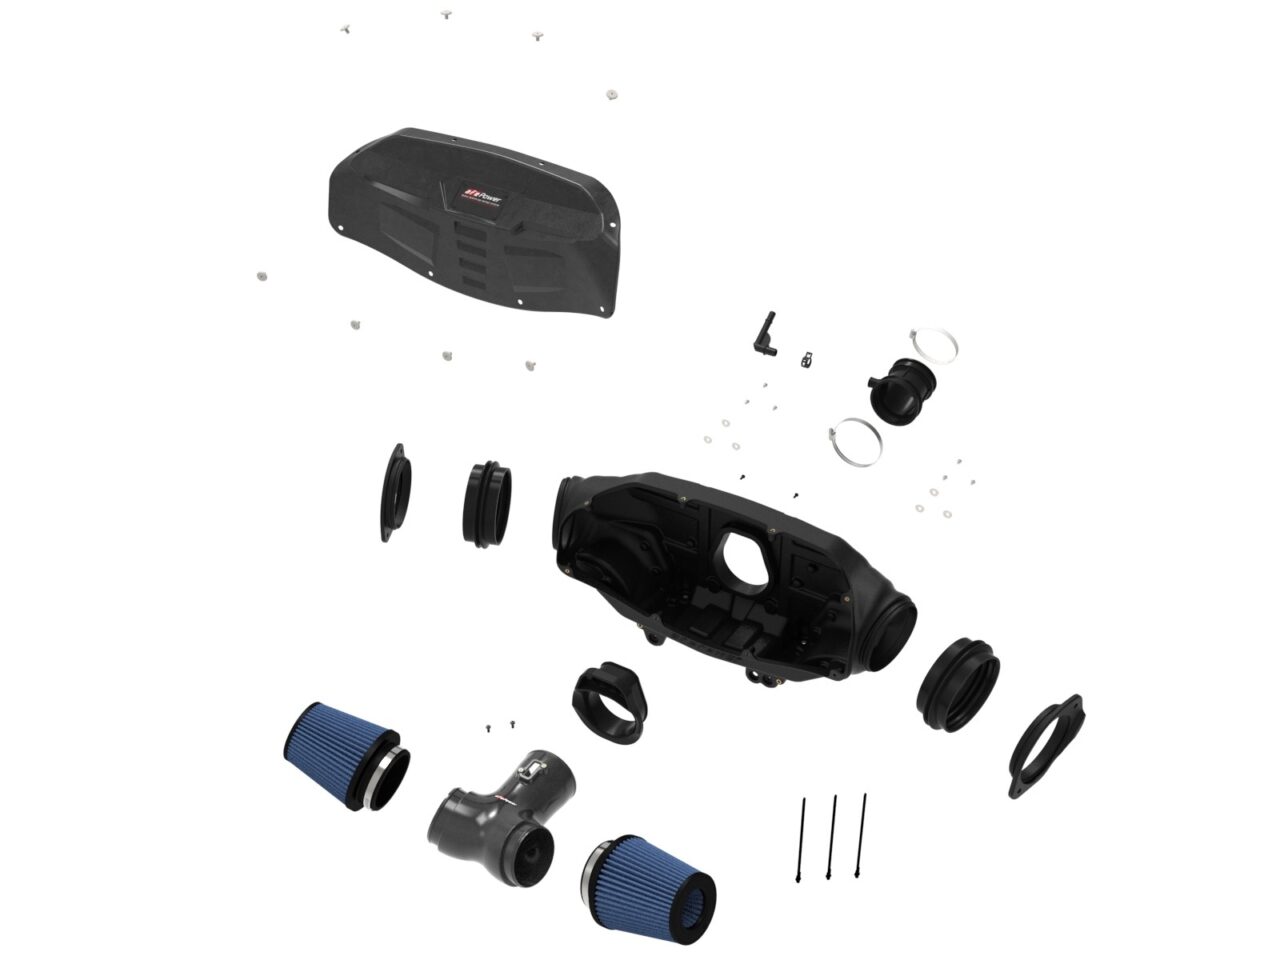 Exploded view showing all parts of aFe POWER intake system for Corvette C8 on white background